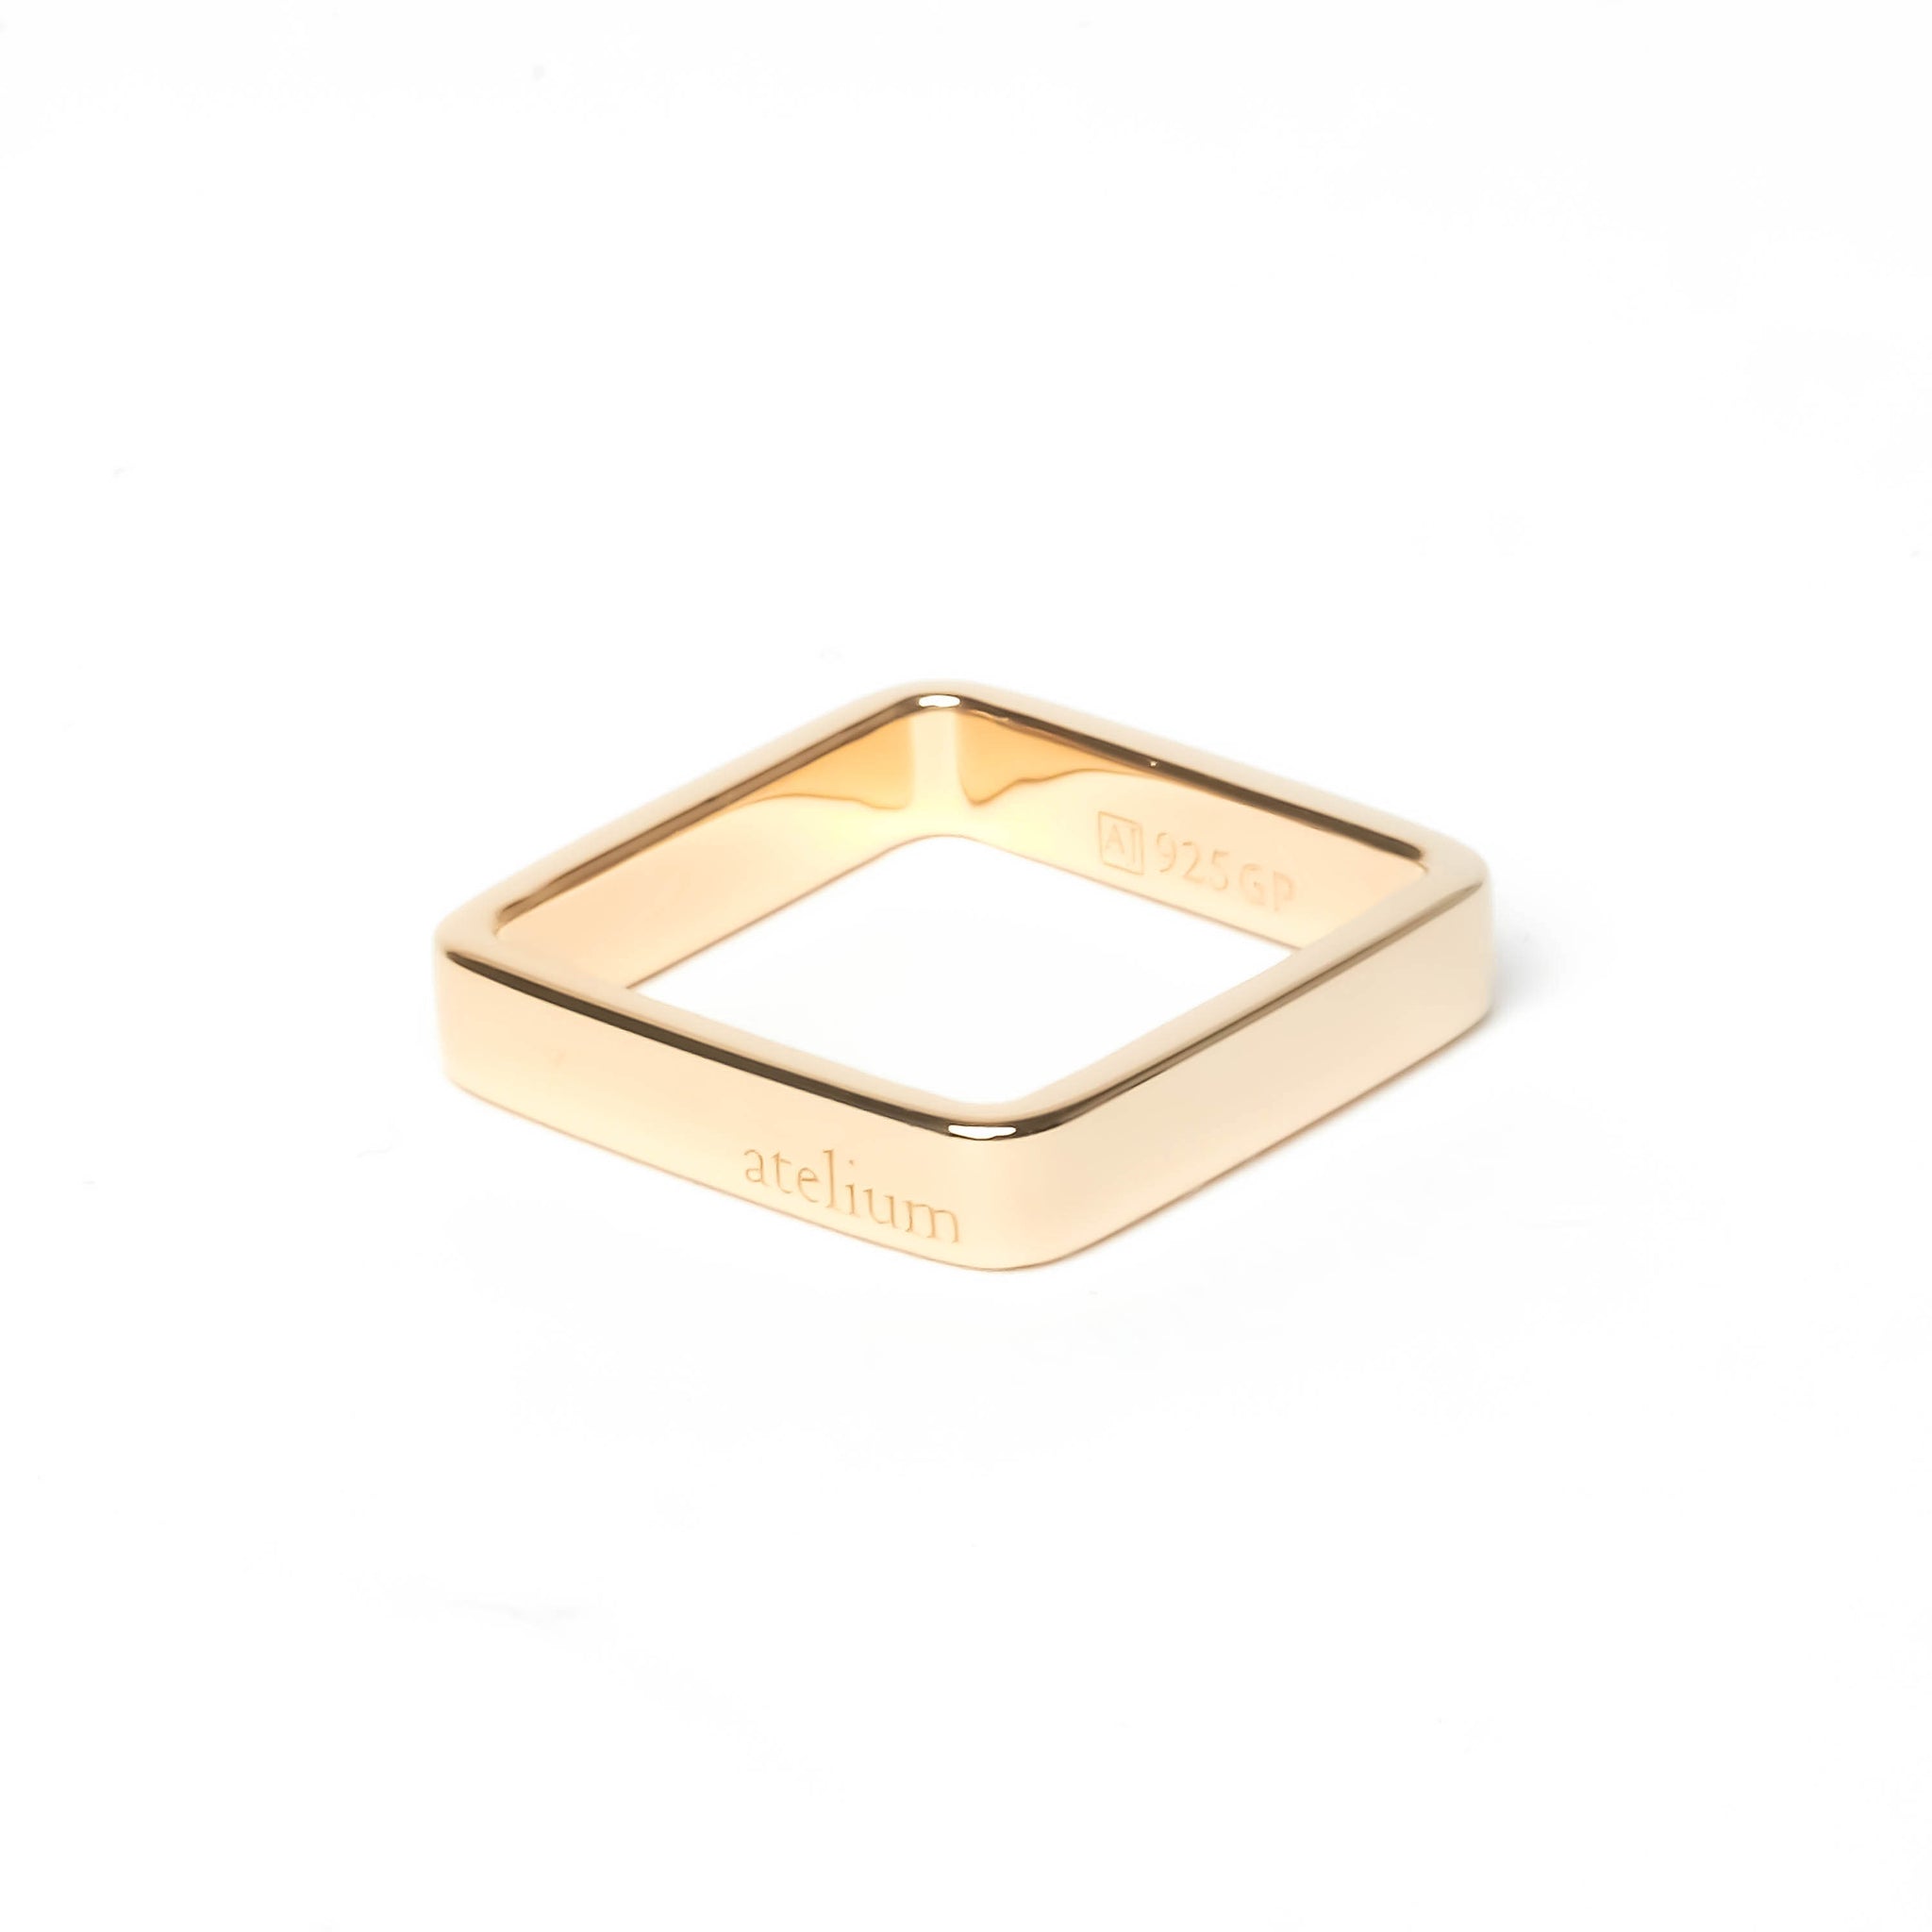 4 mm wide gold ring engraved with the brand name atelium